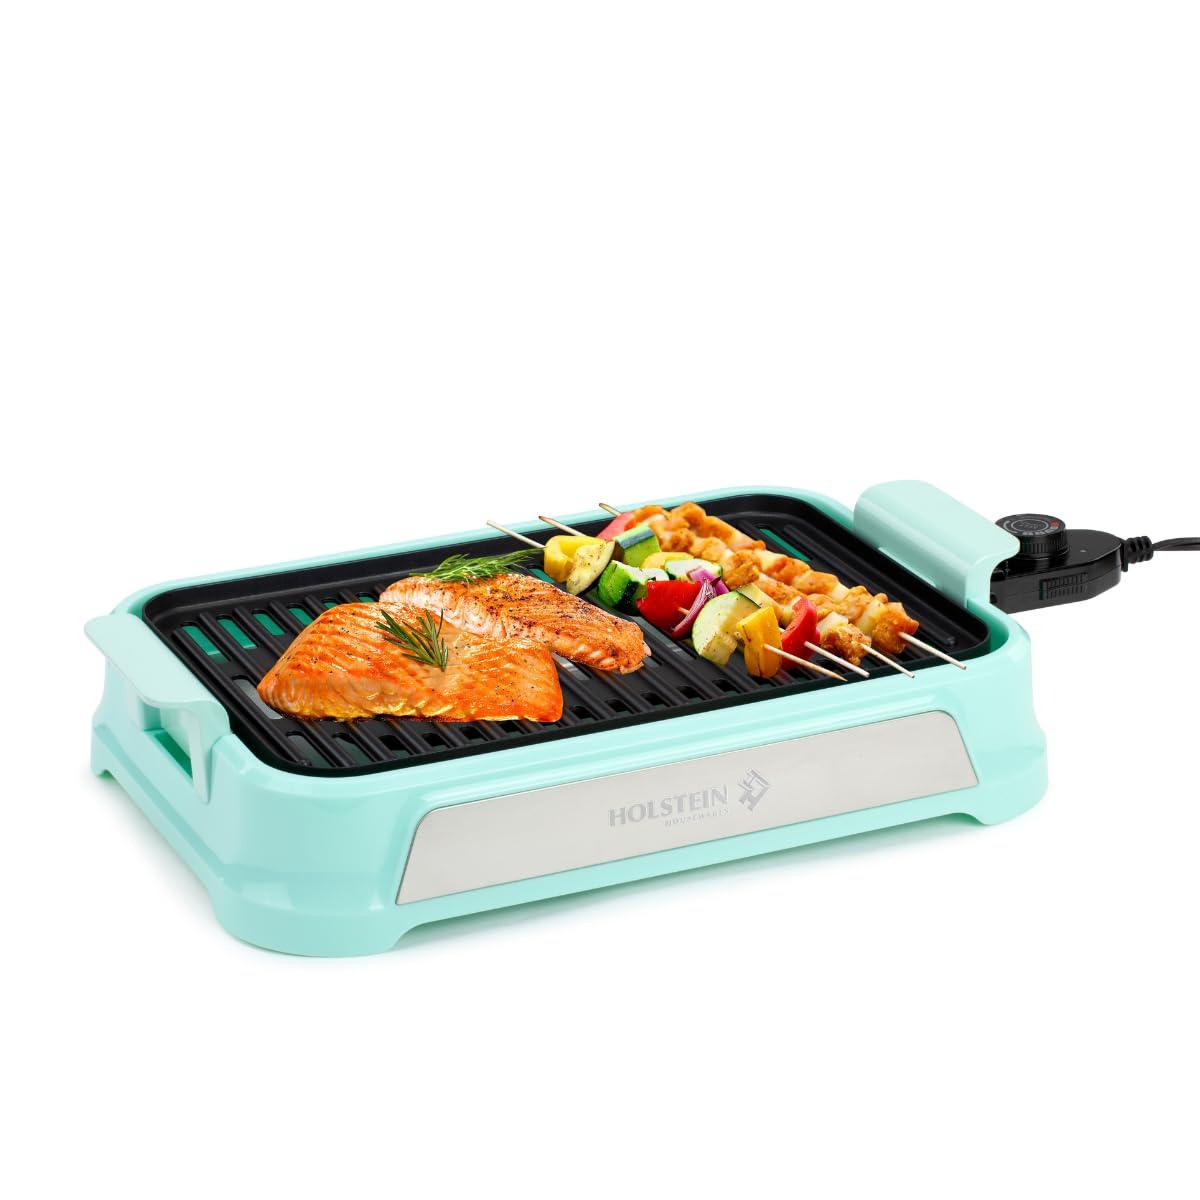 holstein housewares - 1200w 14 inch smokeless grill, mint - convenient and user friendly with optimal cooking indicator light